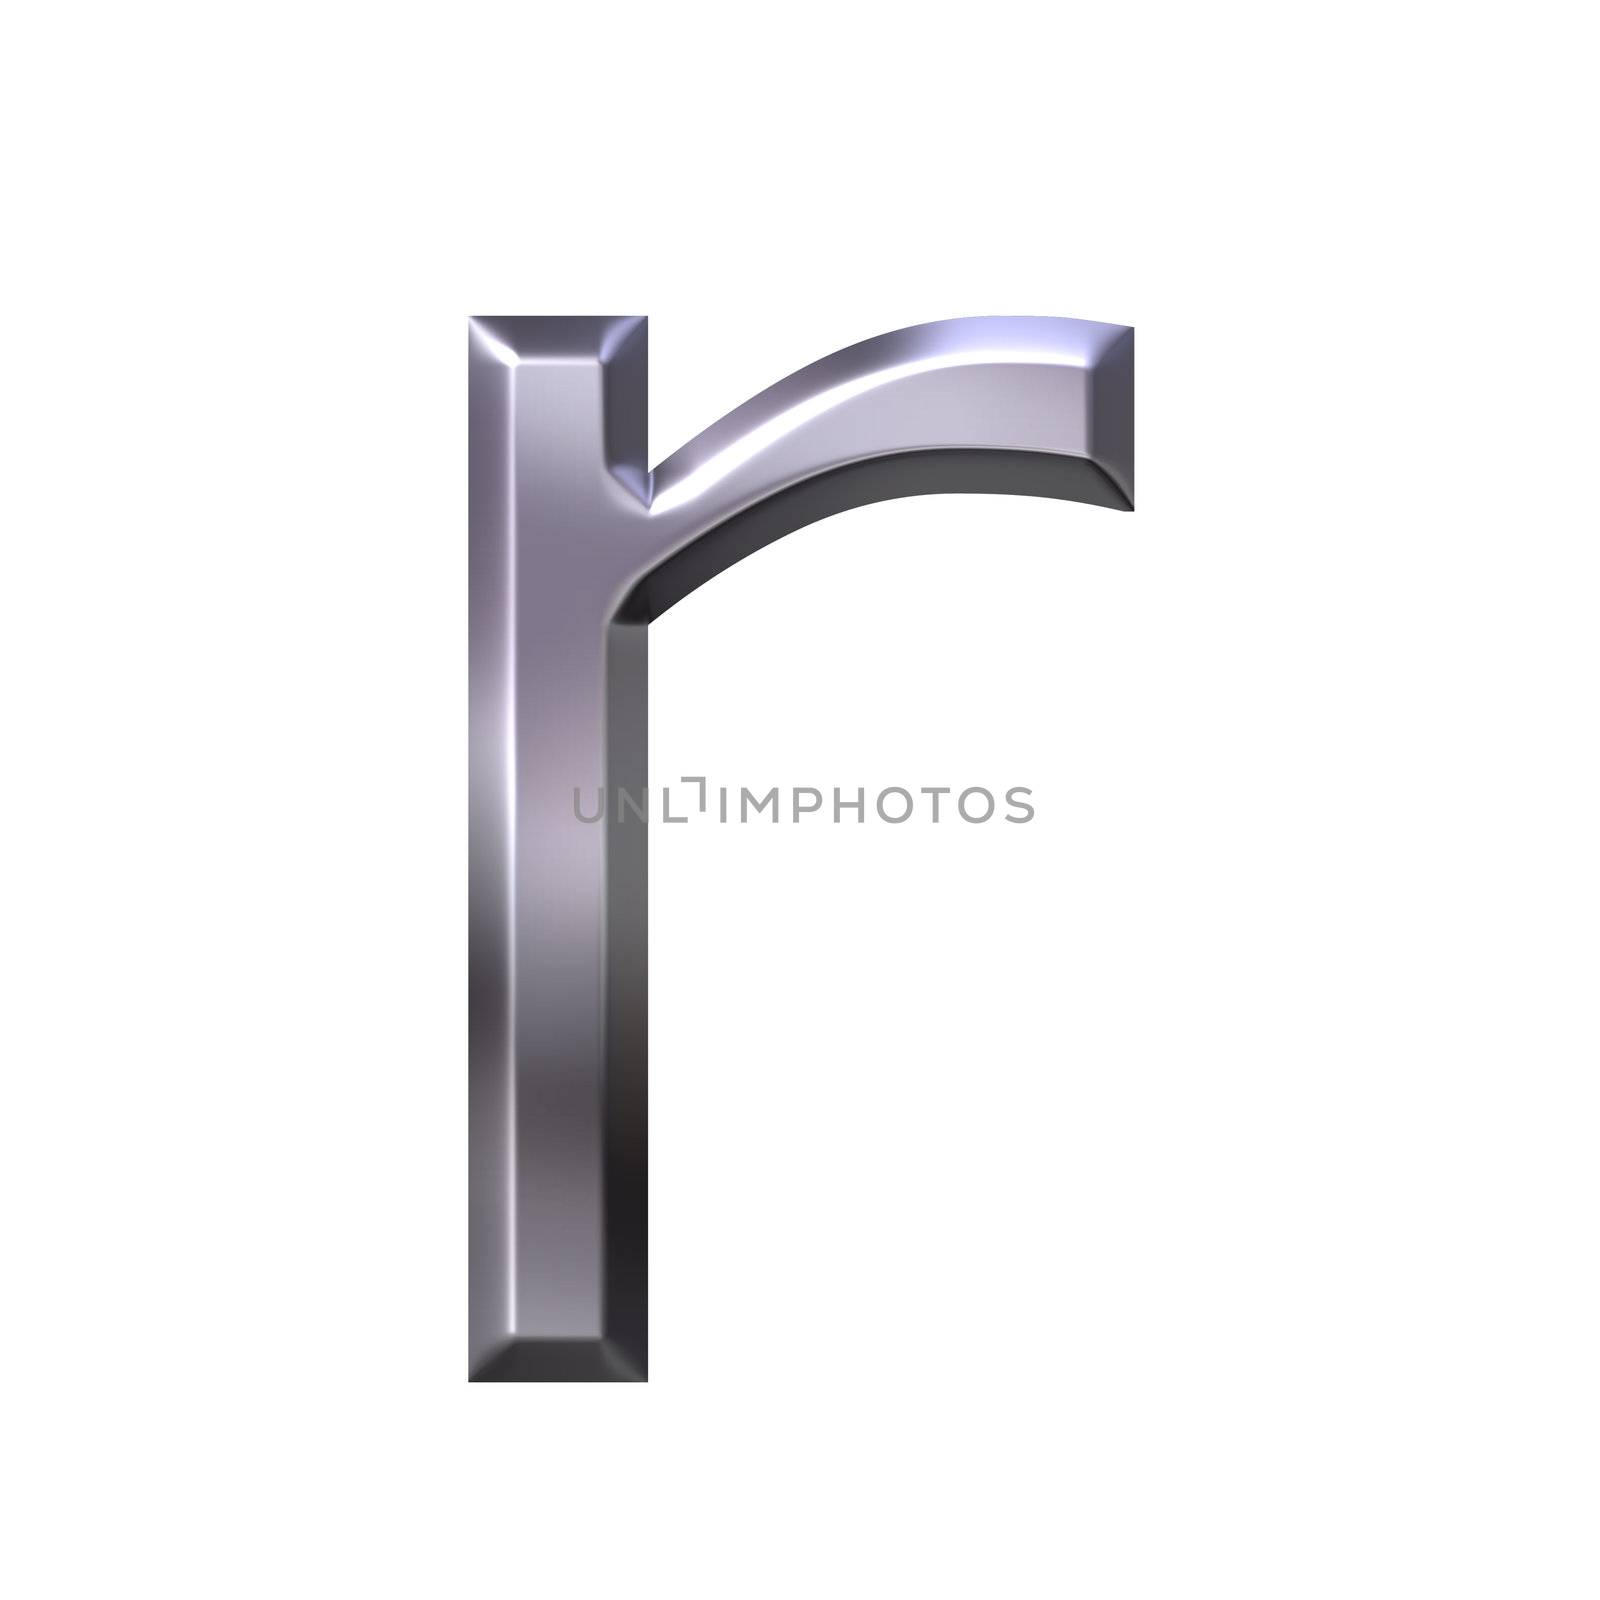 3d silver letter r isolated in white